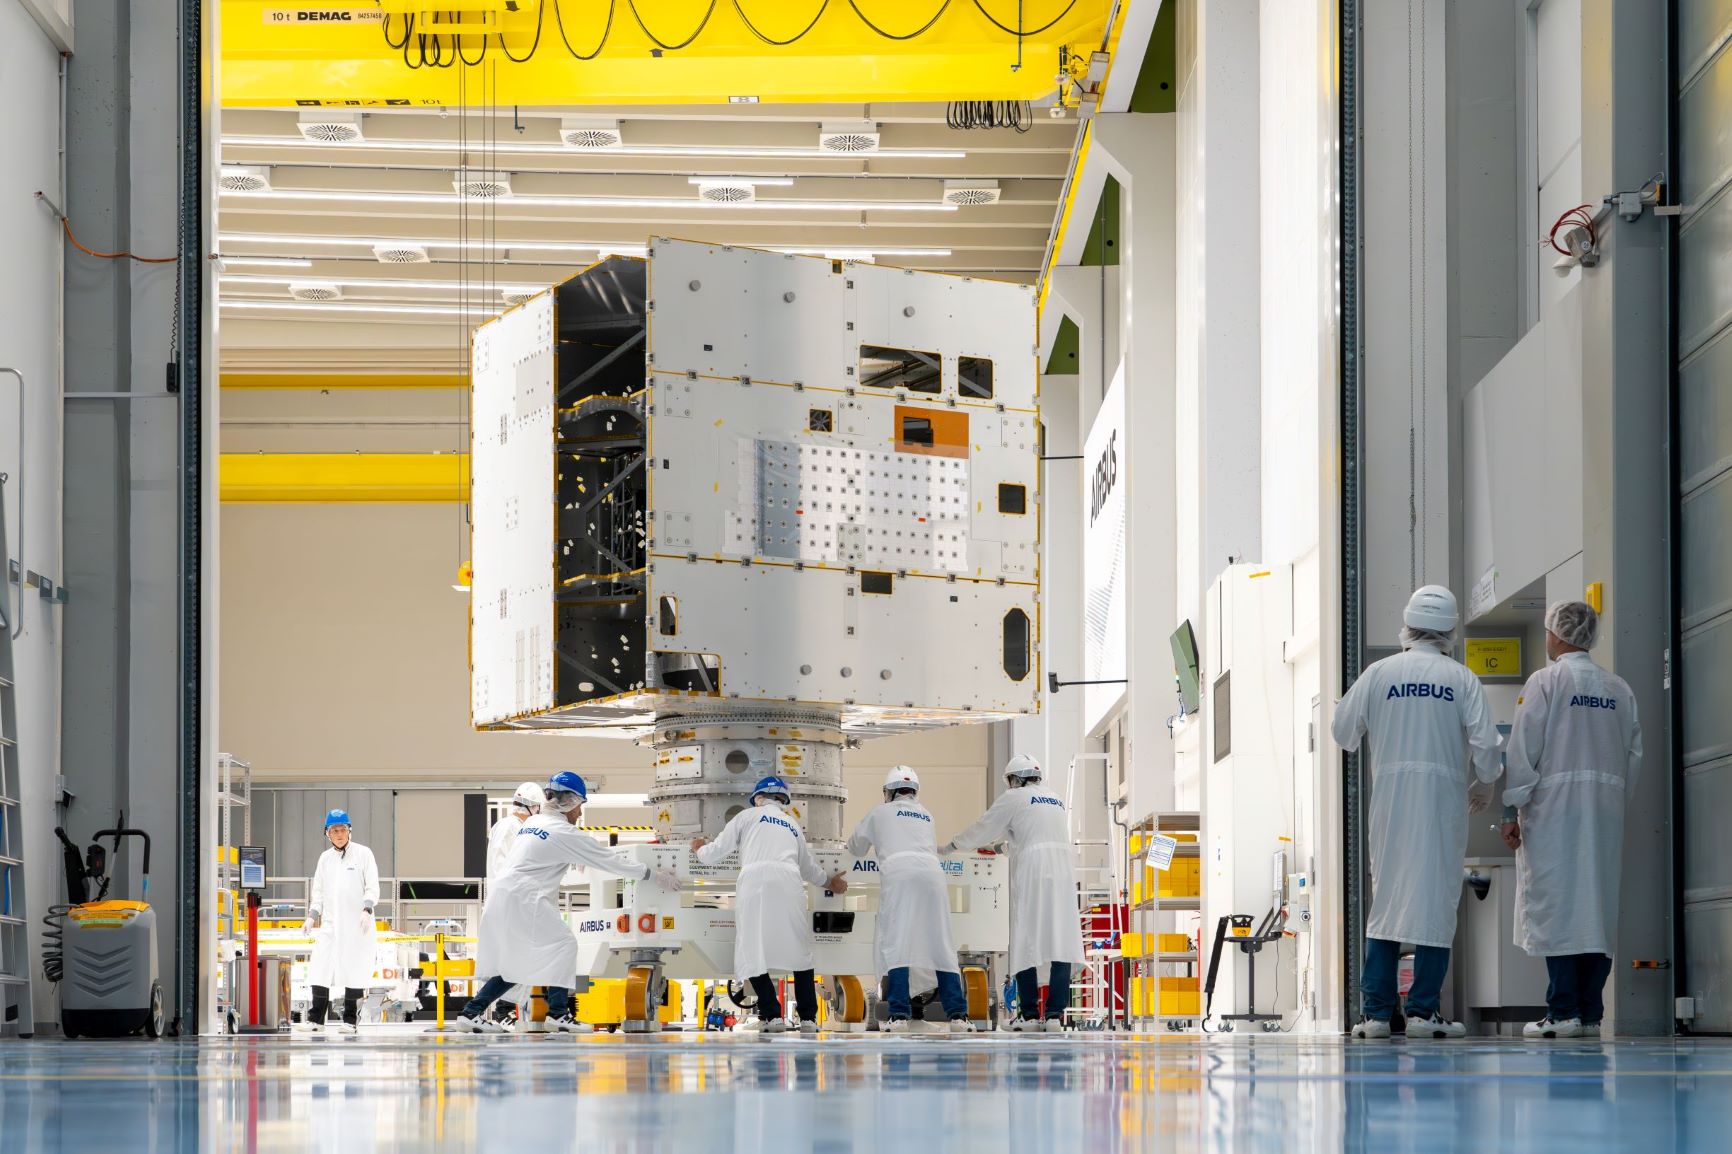 Arrival of the Galileo to the Friedrichshafen cleanroom - Copyright Airbus